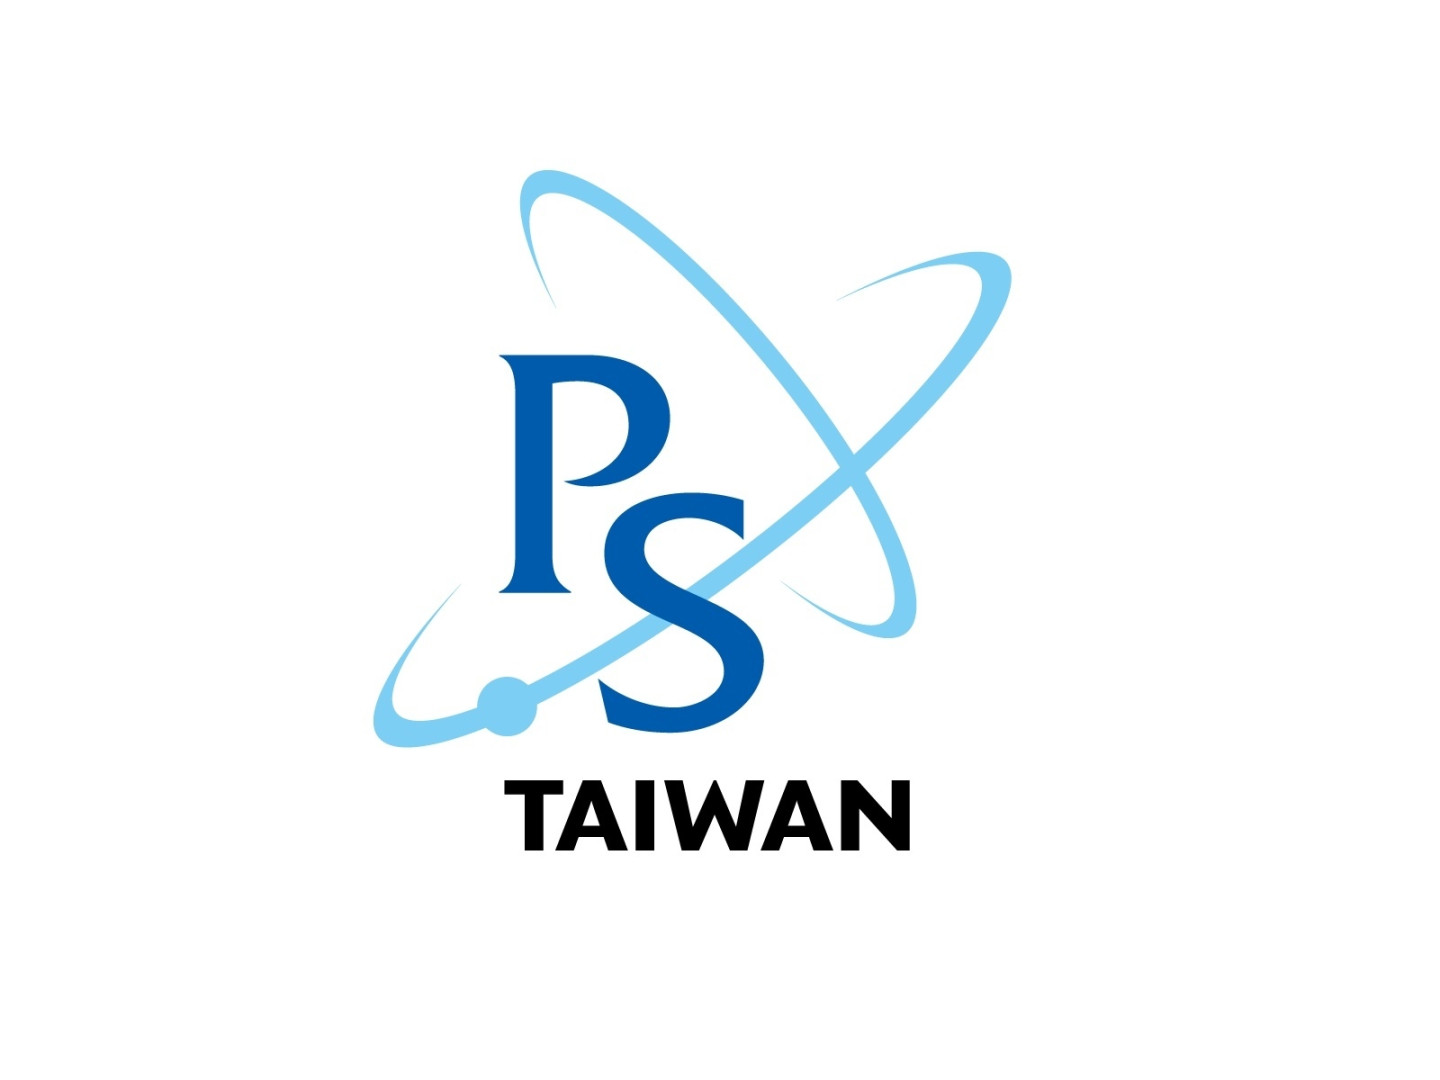  Faculty Position Institute of Physics, National Yang Ming Chiao Tung University, Taiwan 